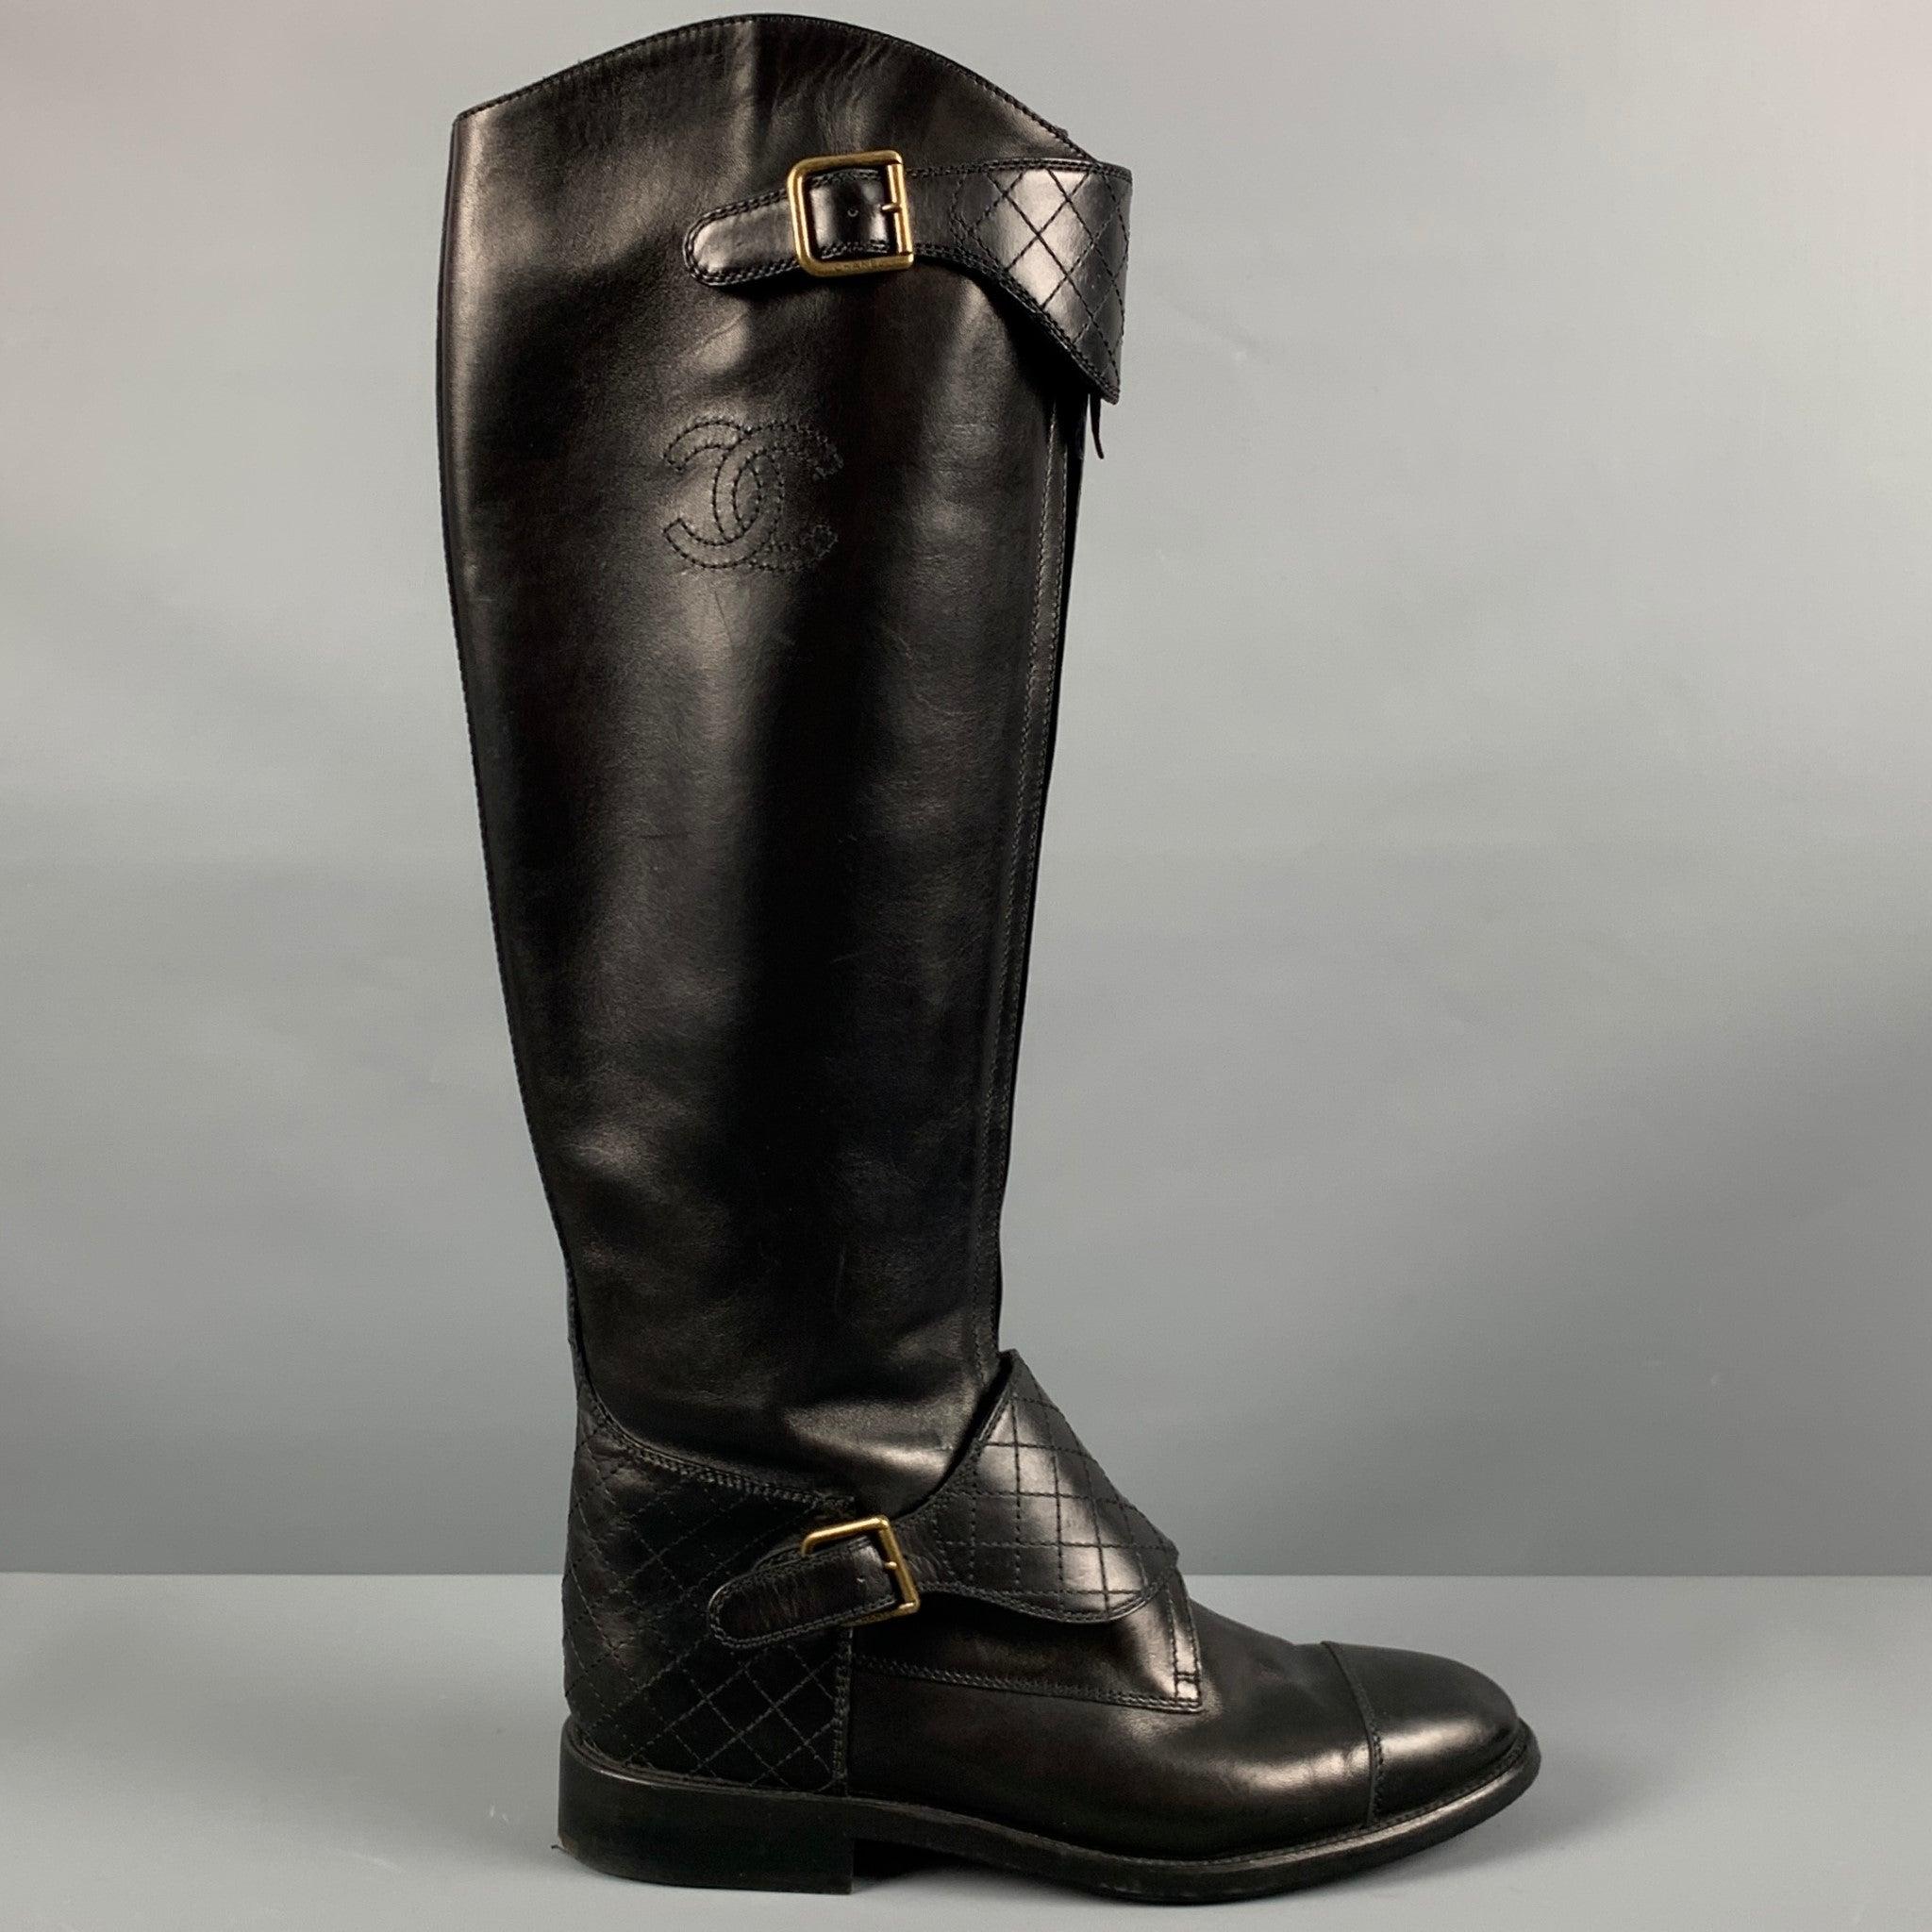 CHANEL
boots in a black leather fabric featuring riding boots style, double buckle with brass tone hardware, and embroidered signature logo. Made in Italy.Very Good Pre-Owned Condition. Minor signs of wear. 

Marked:   D G28527 

Measurements: 
 